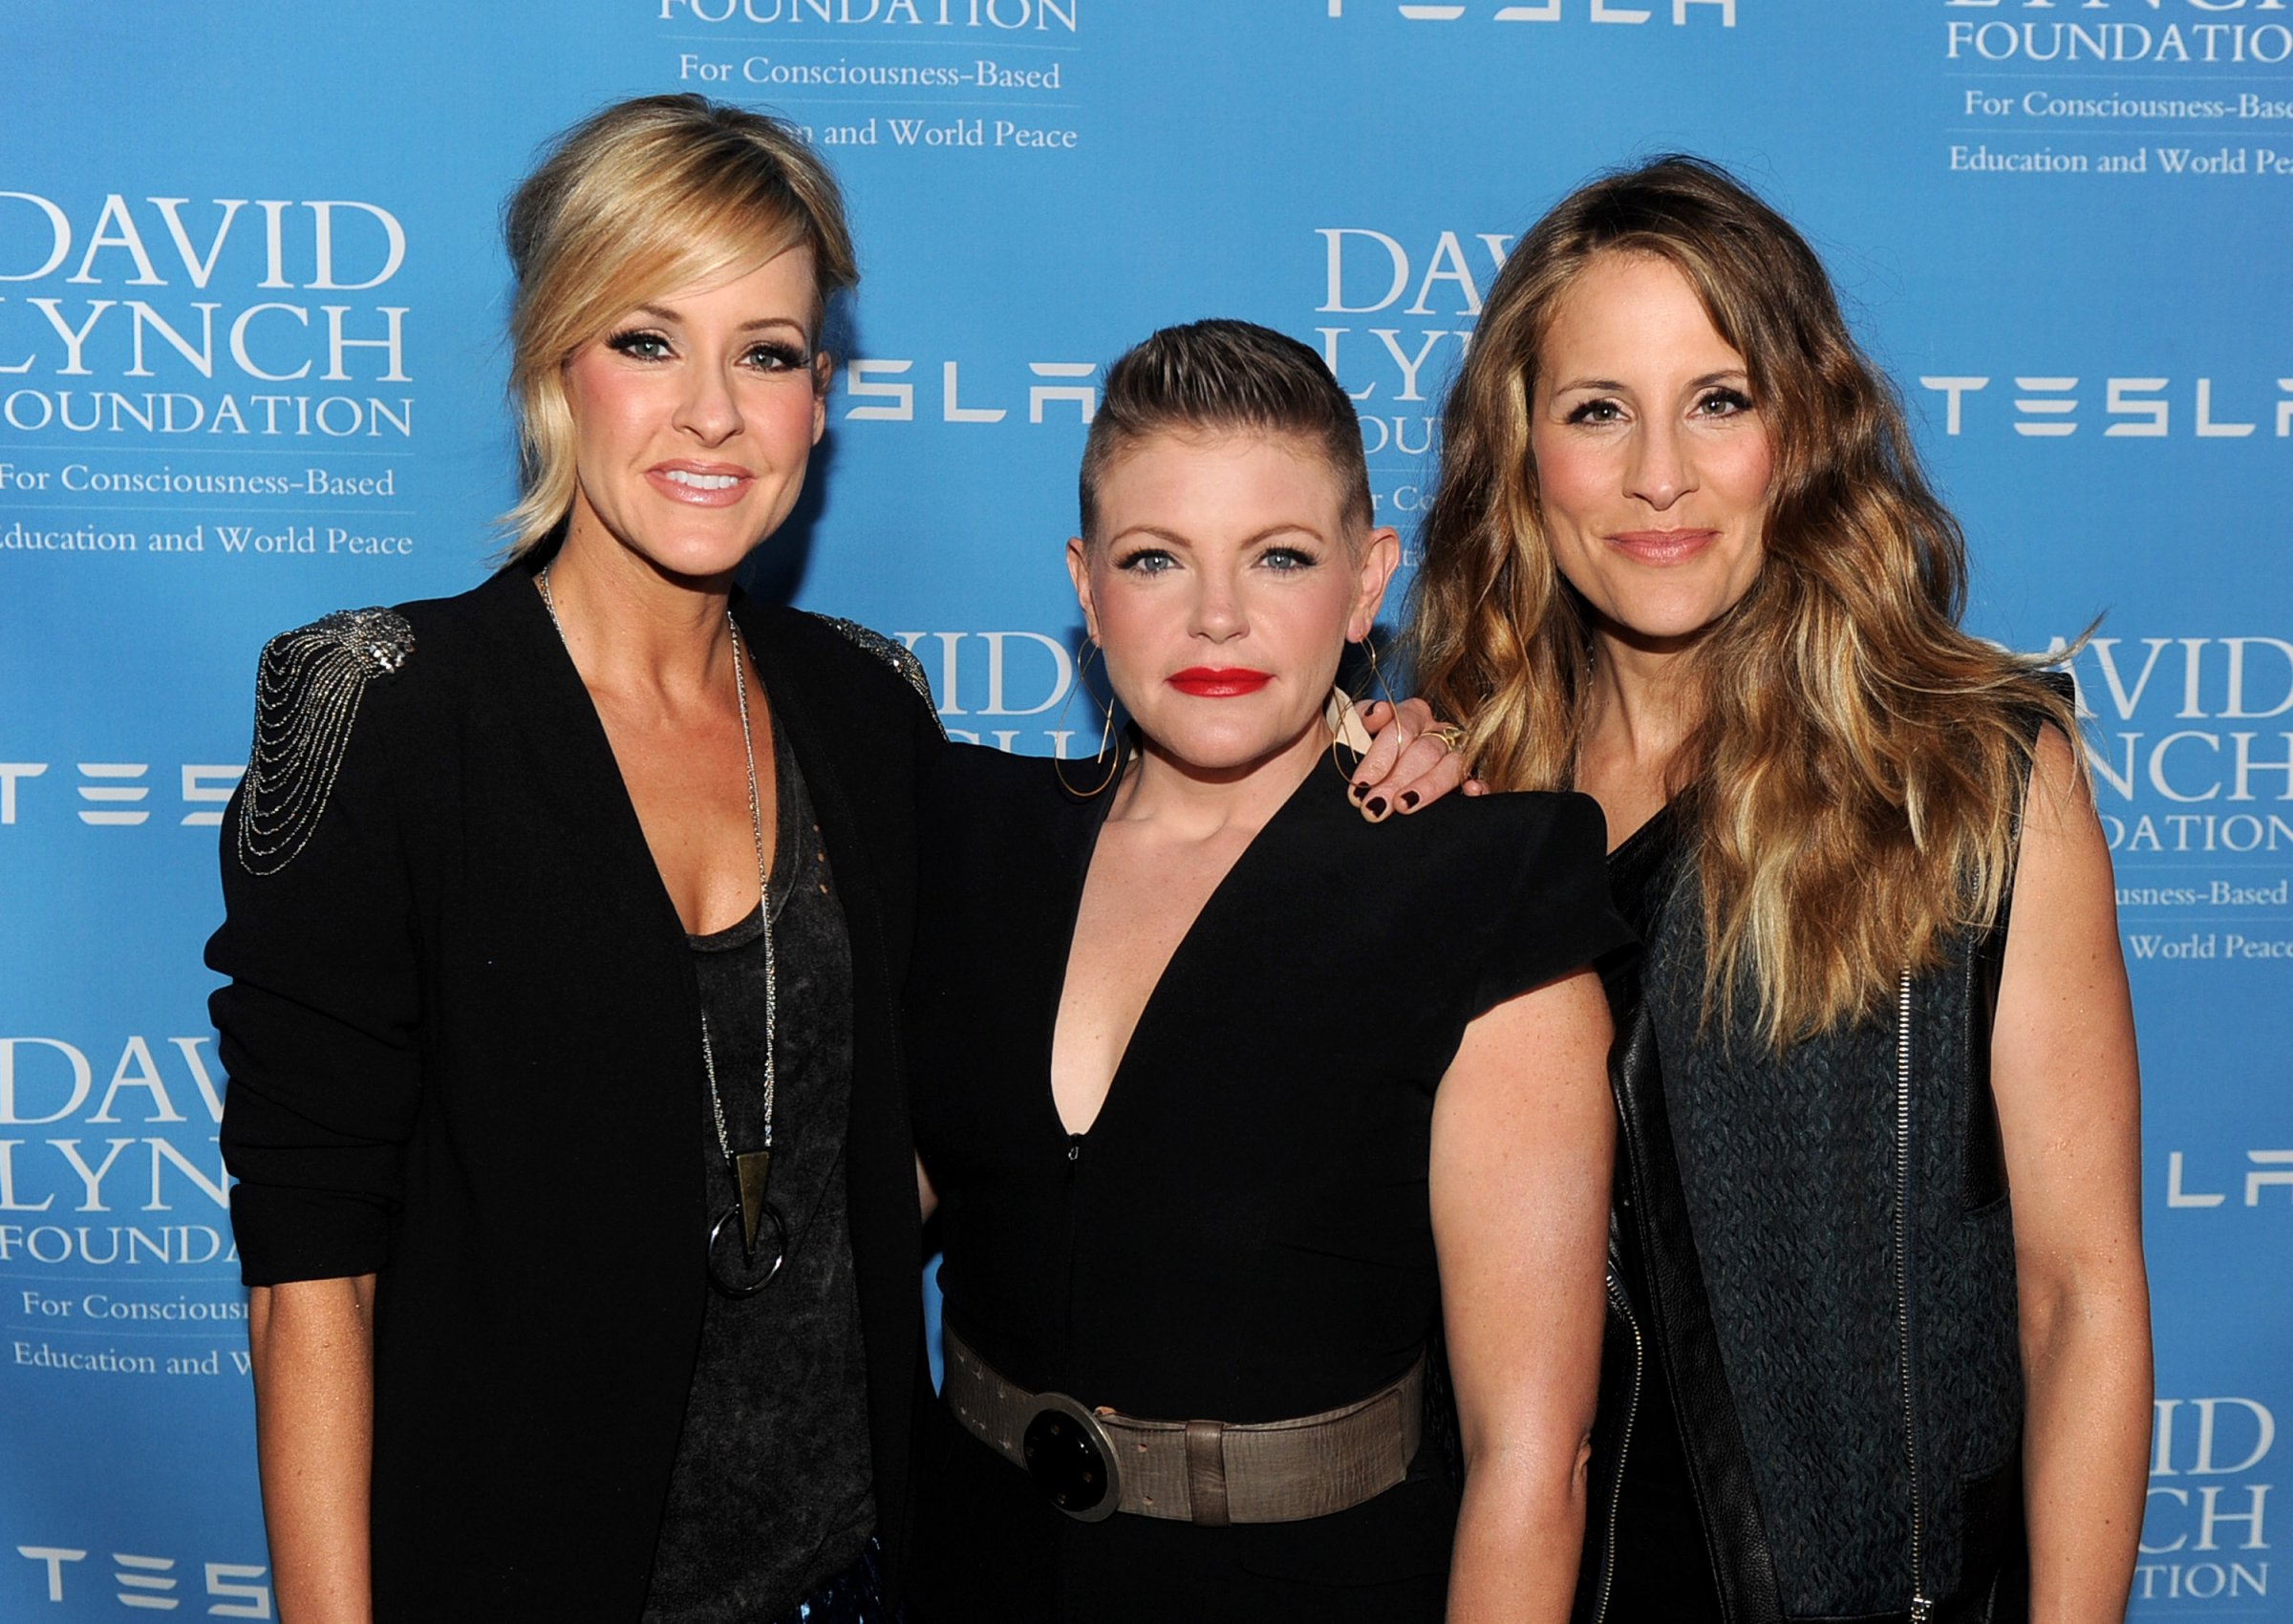 (L-R) Martie Maguire, Natalie Maines and Emily Robison of the Dixie Chicks at the David Lynch Foundation Gala in Beverly Hills, Calif. on Feb. 27, 2014.